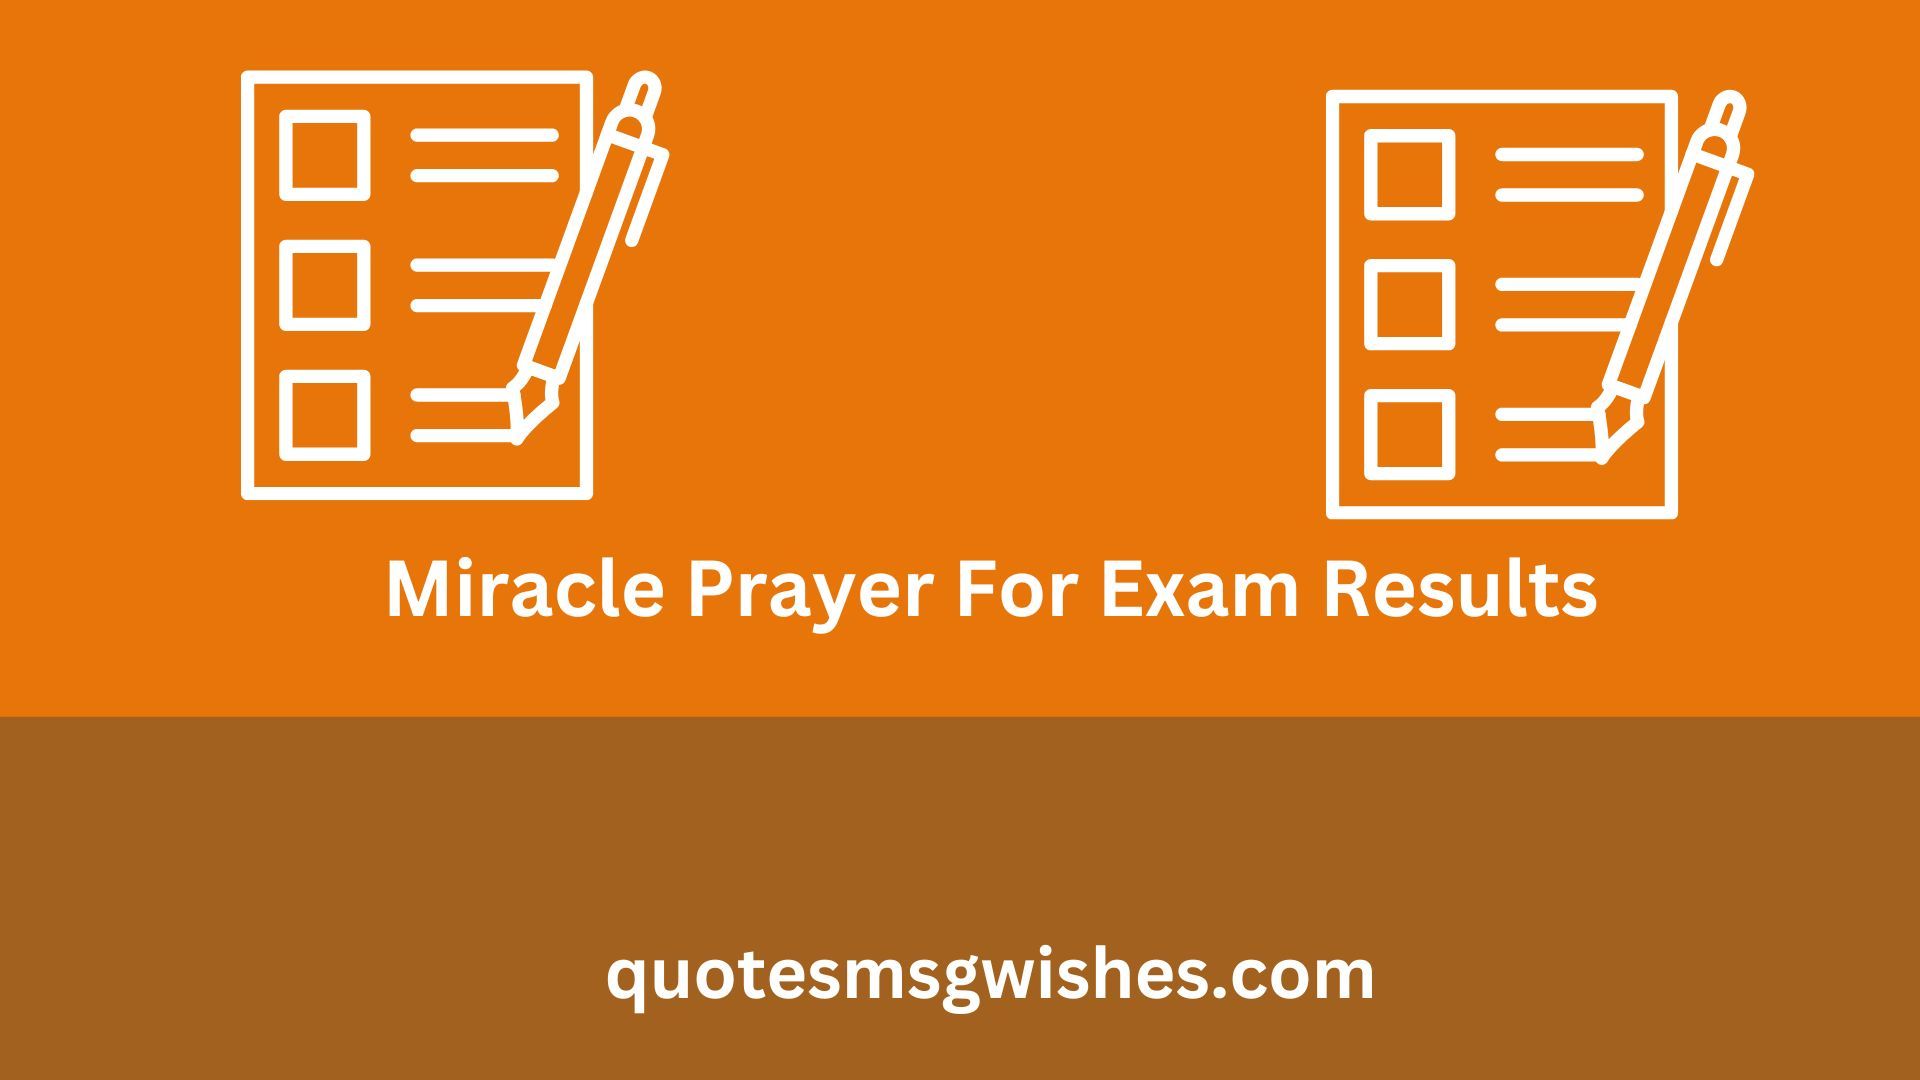 Miracle Prayer For Exam Results